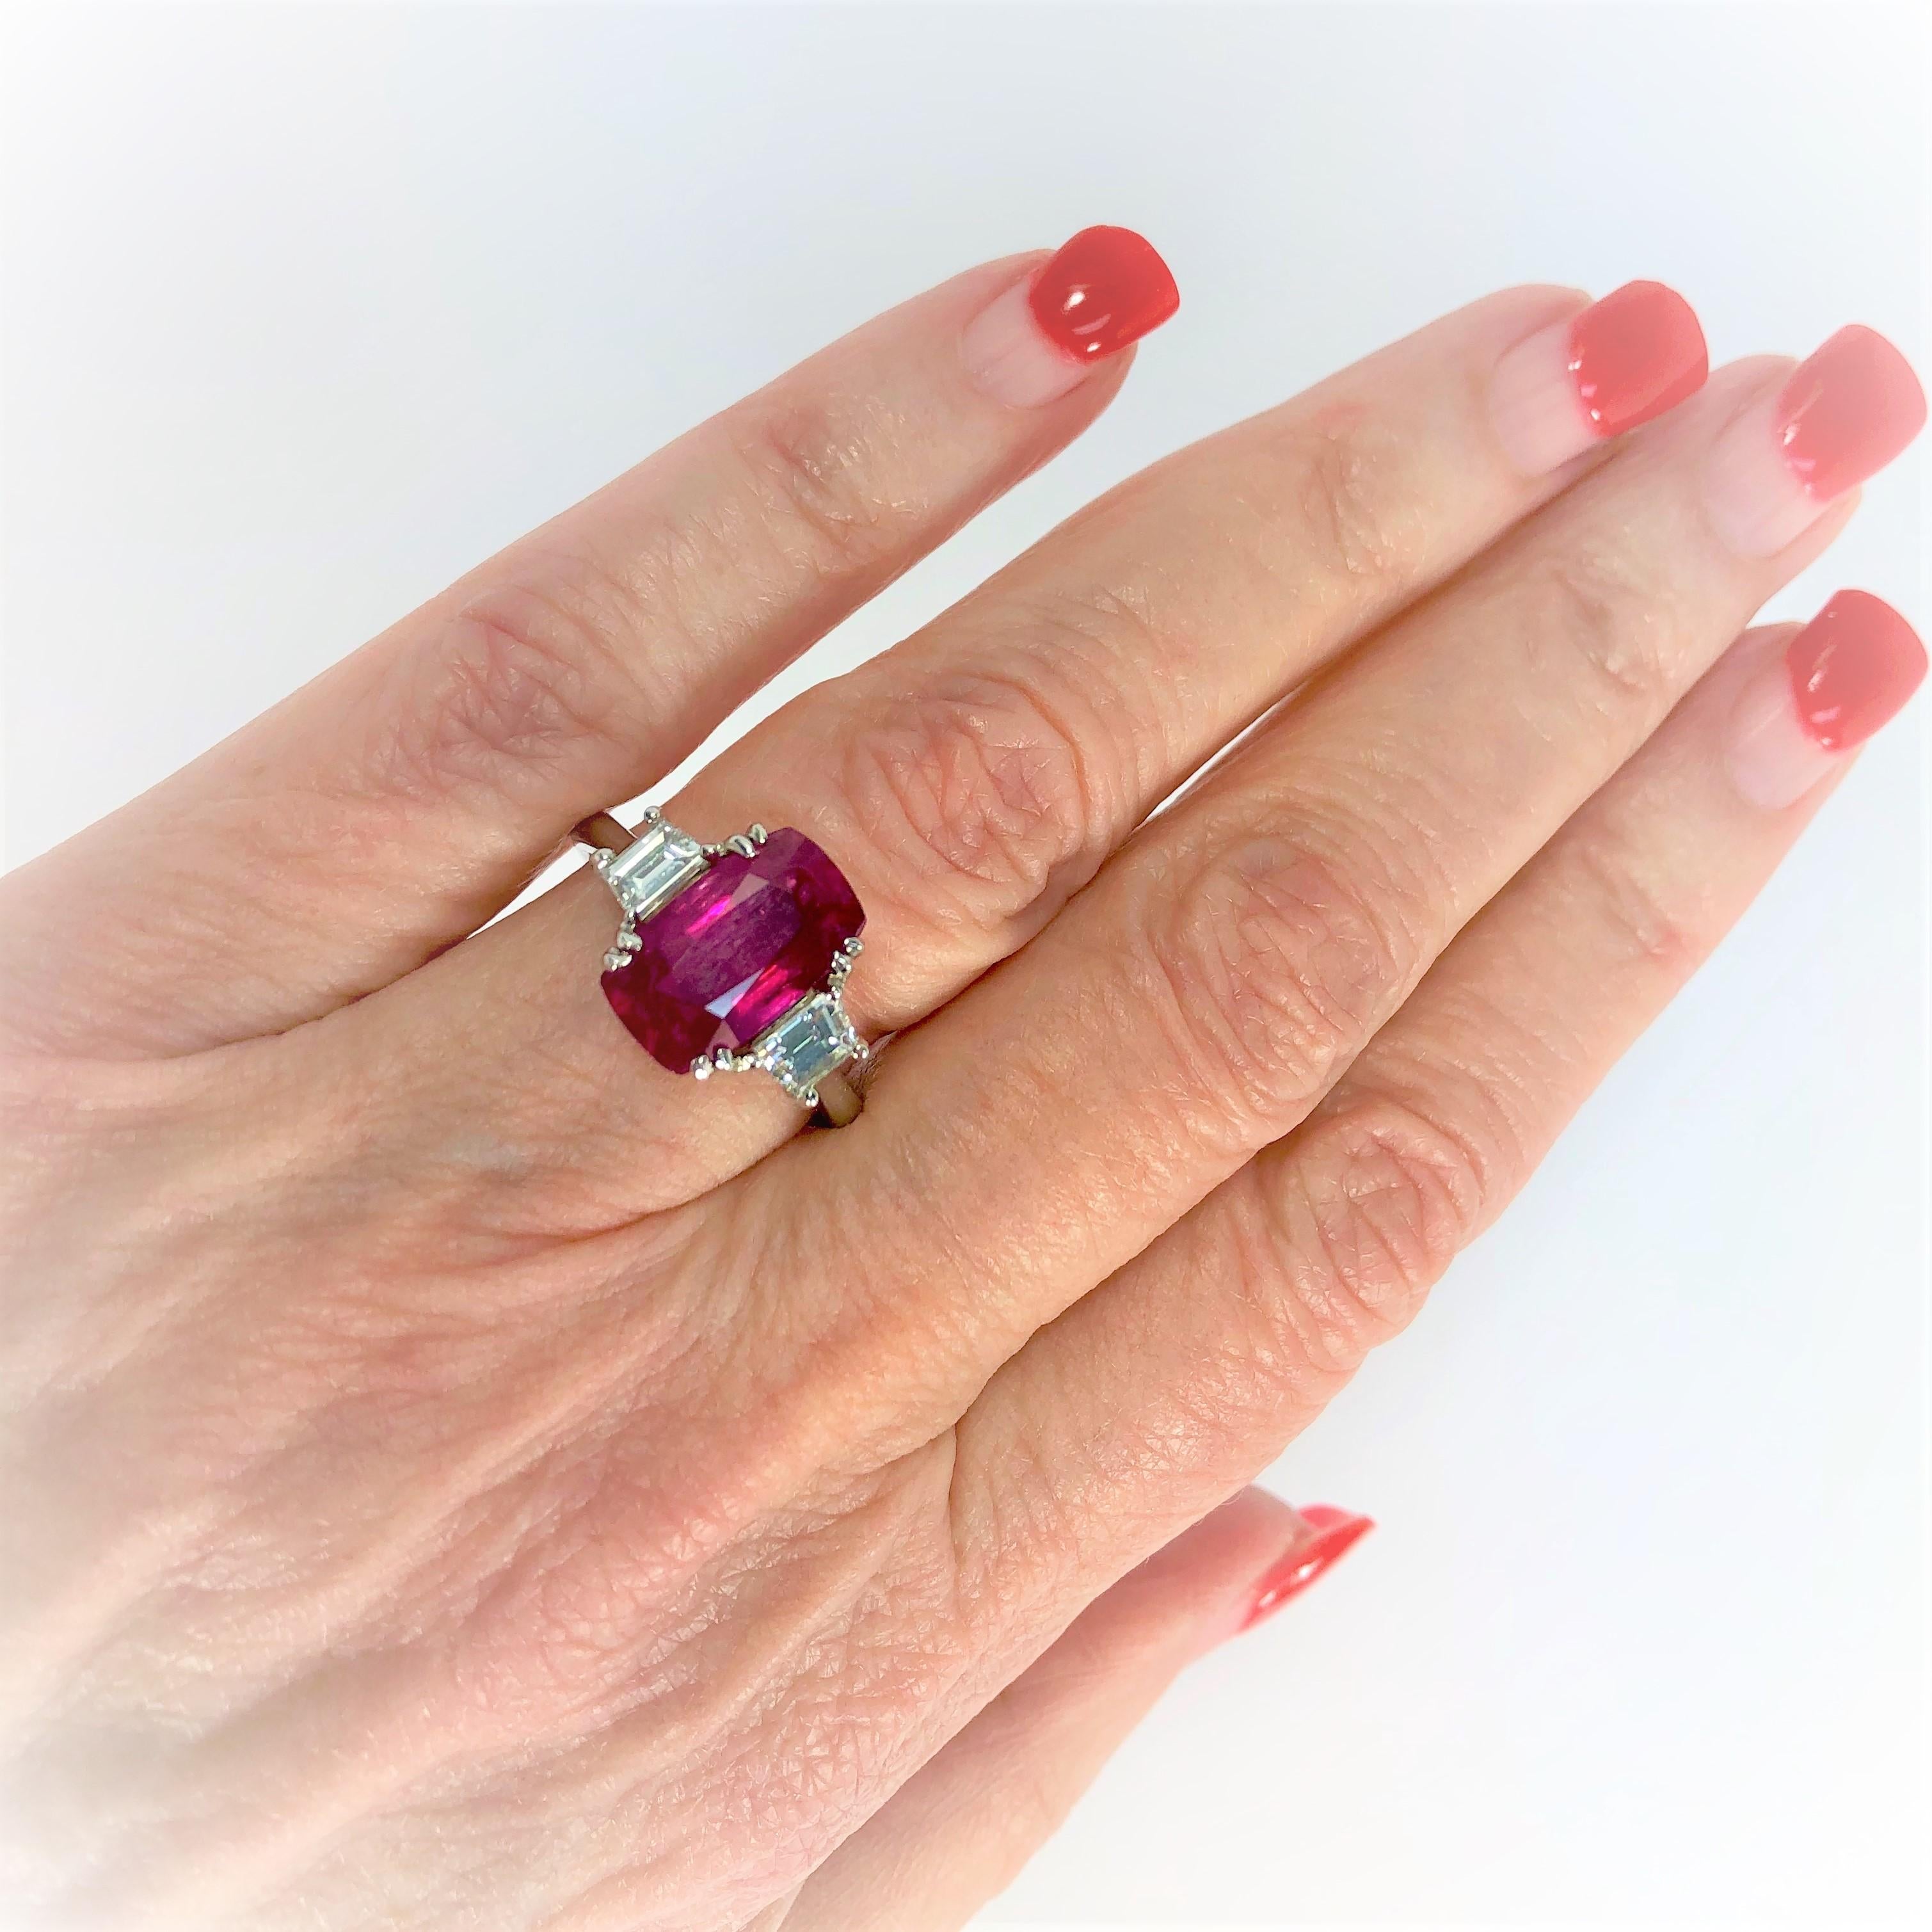 Women's 4.07 Carat Mozambique Ruby and Diamond Three-Stone Ring Set in Platinum